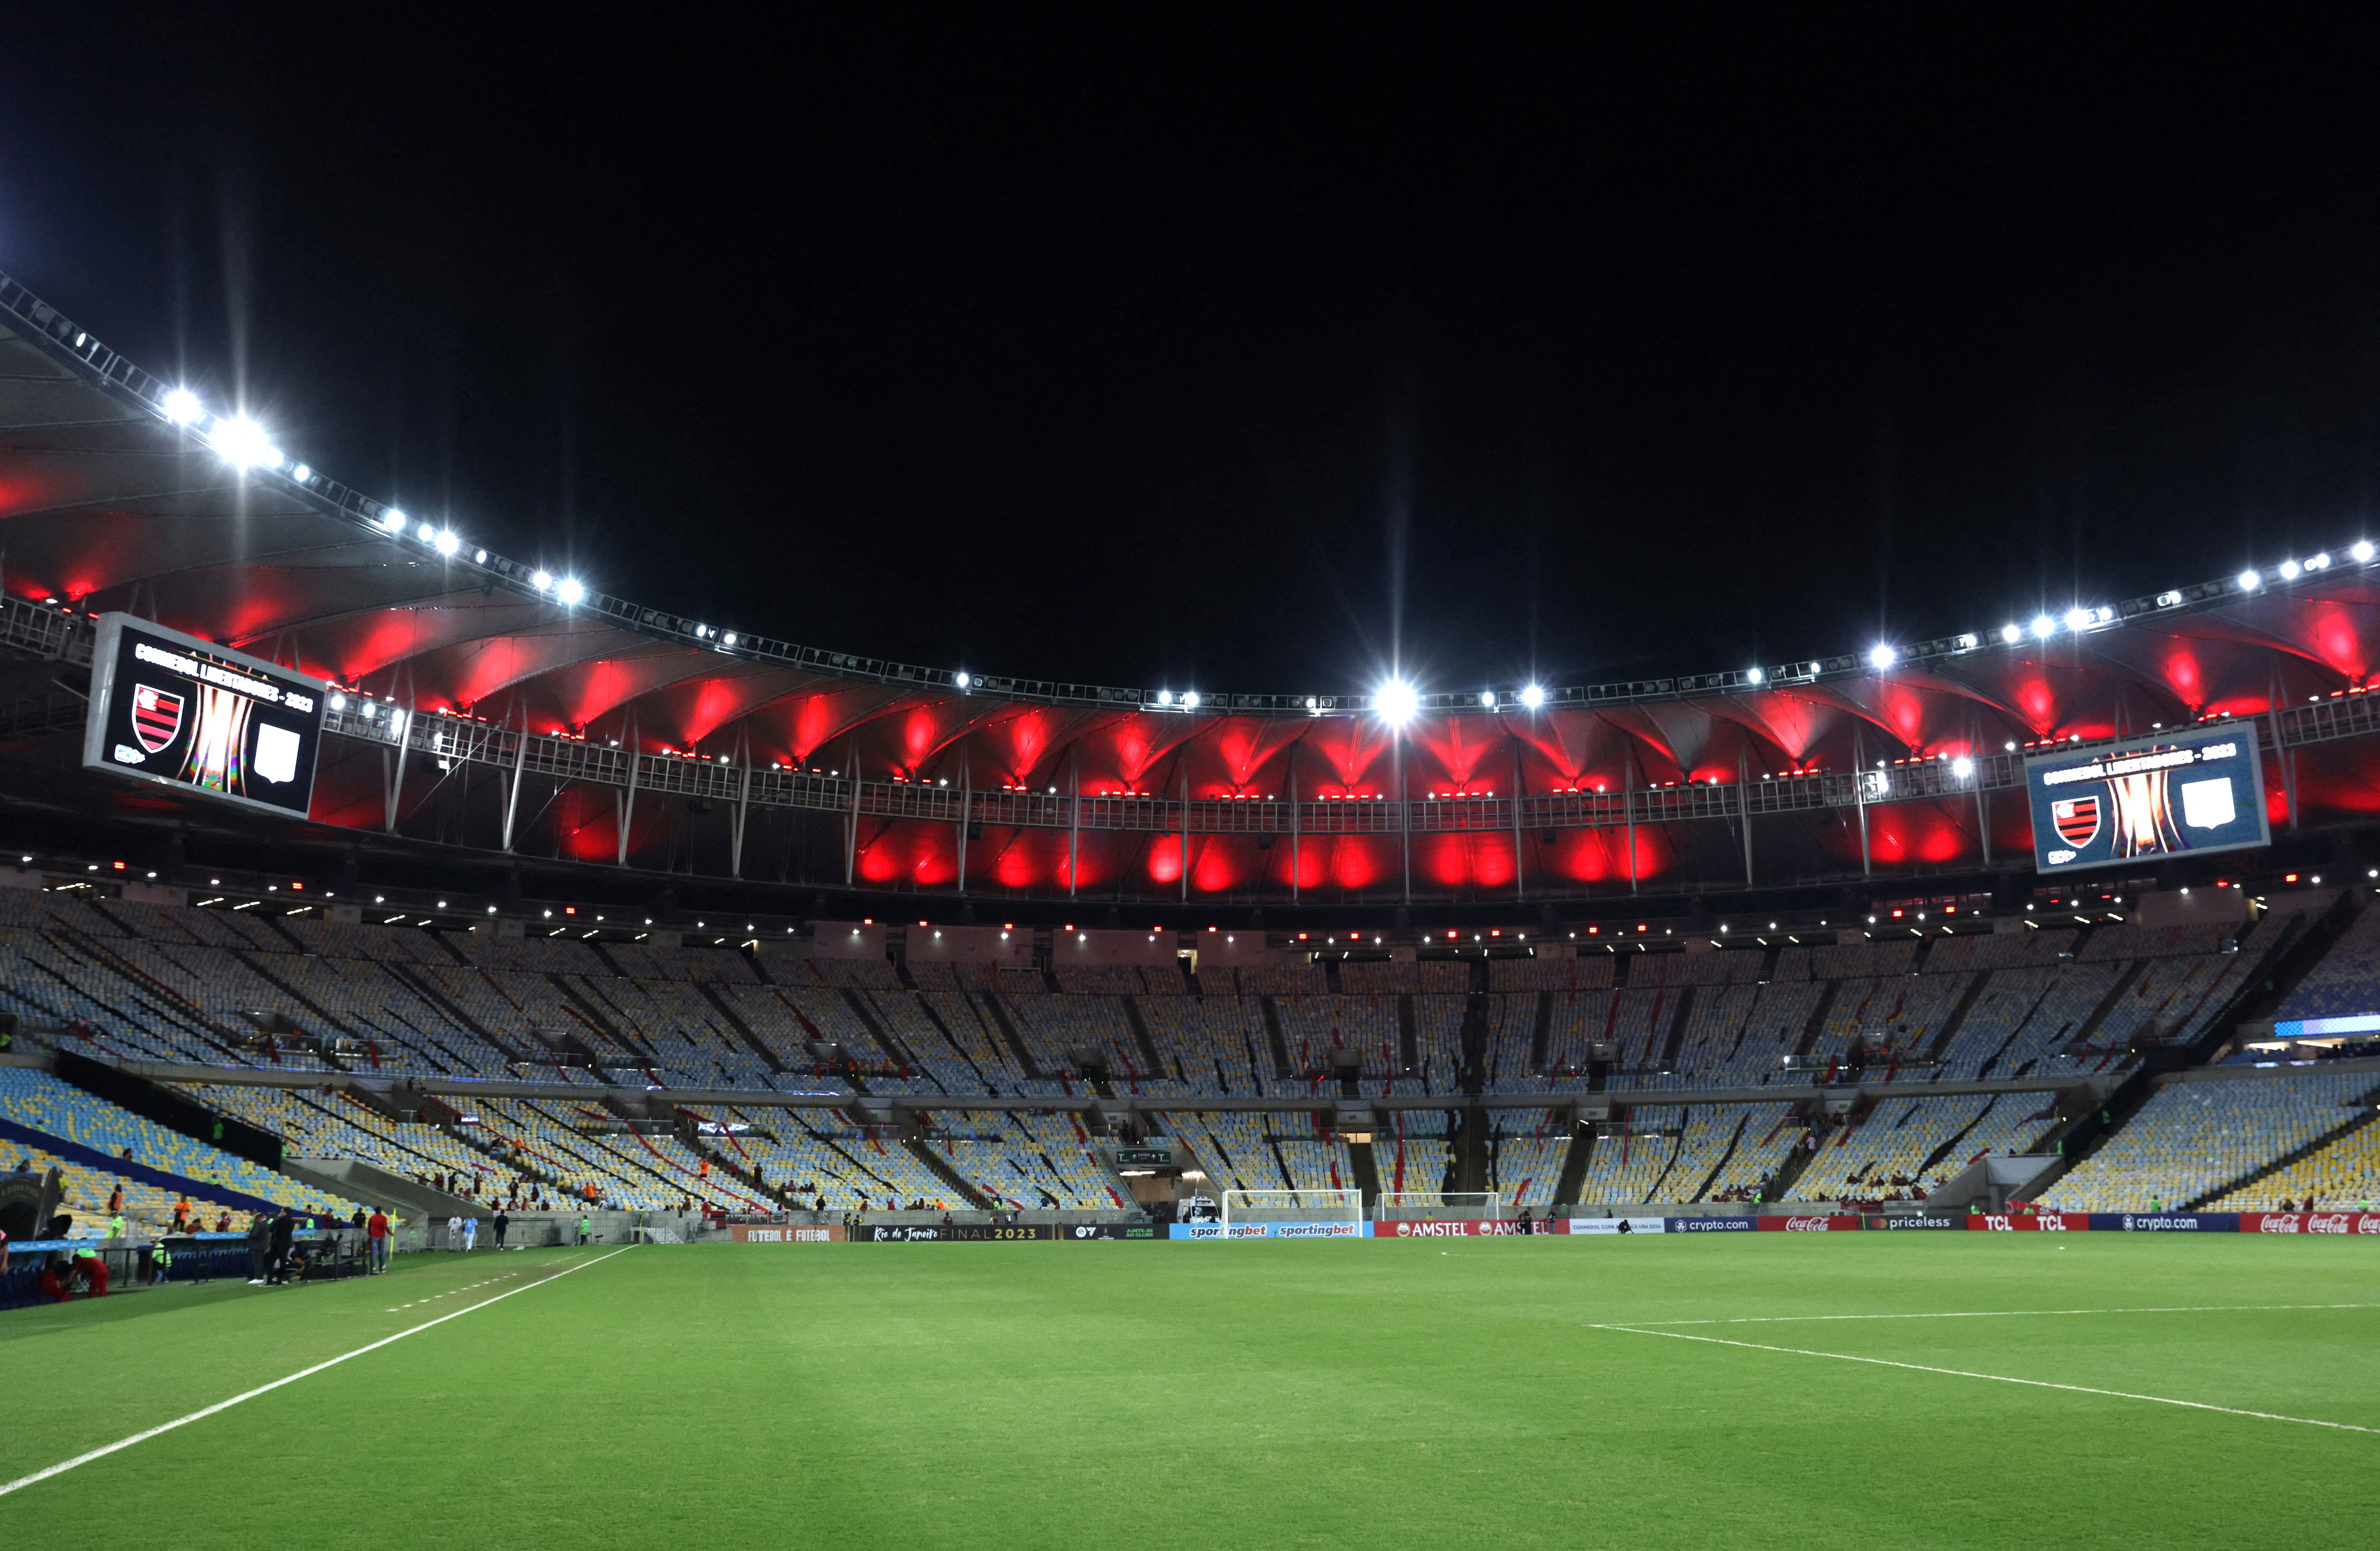 Blood donors offered free tickets to watch Copa do Brasil final Reuters